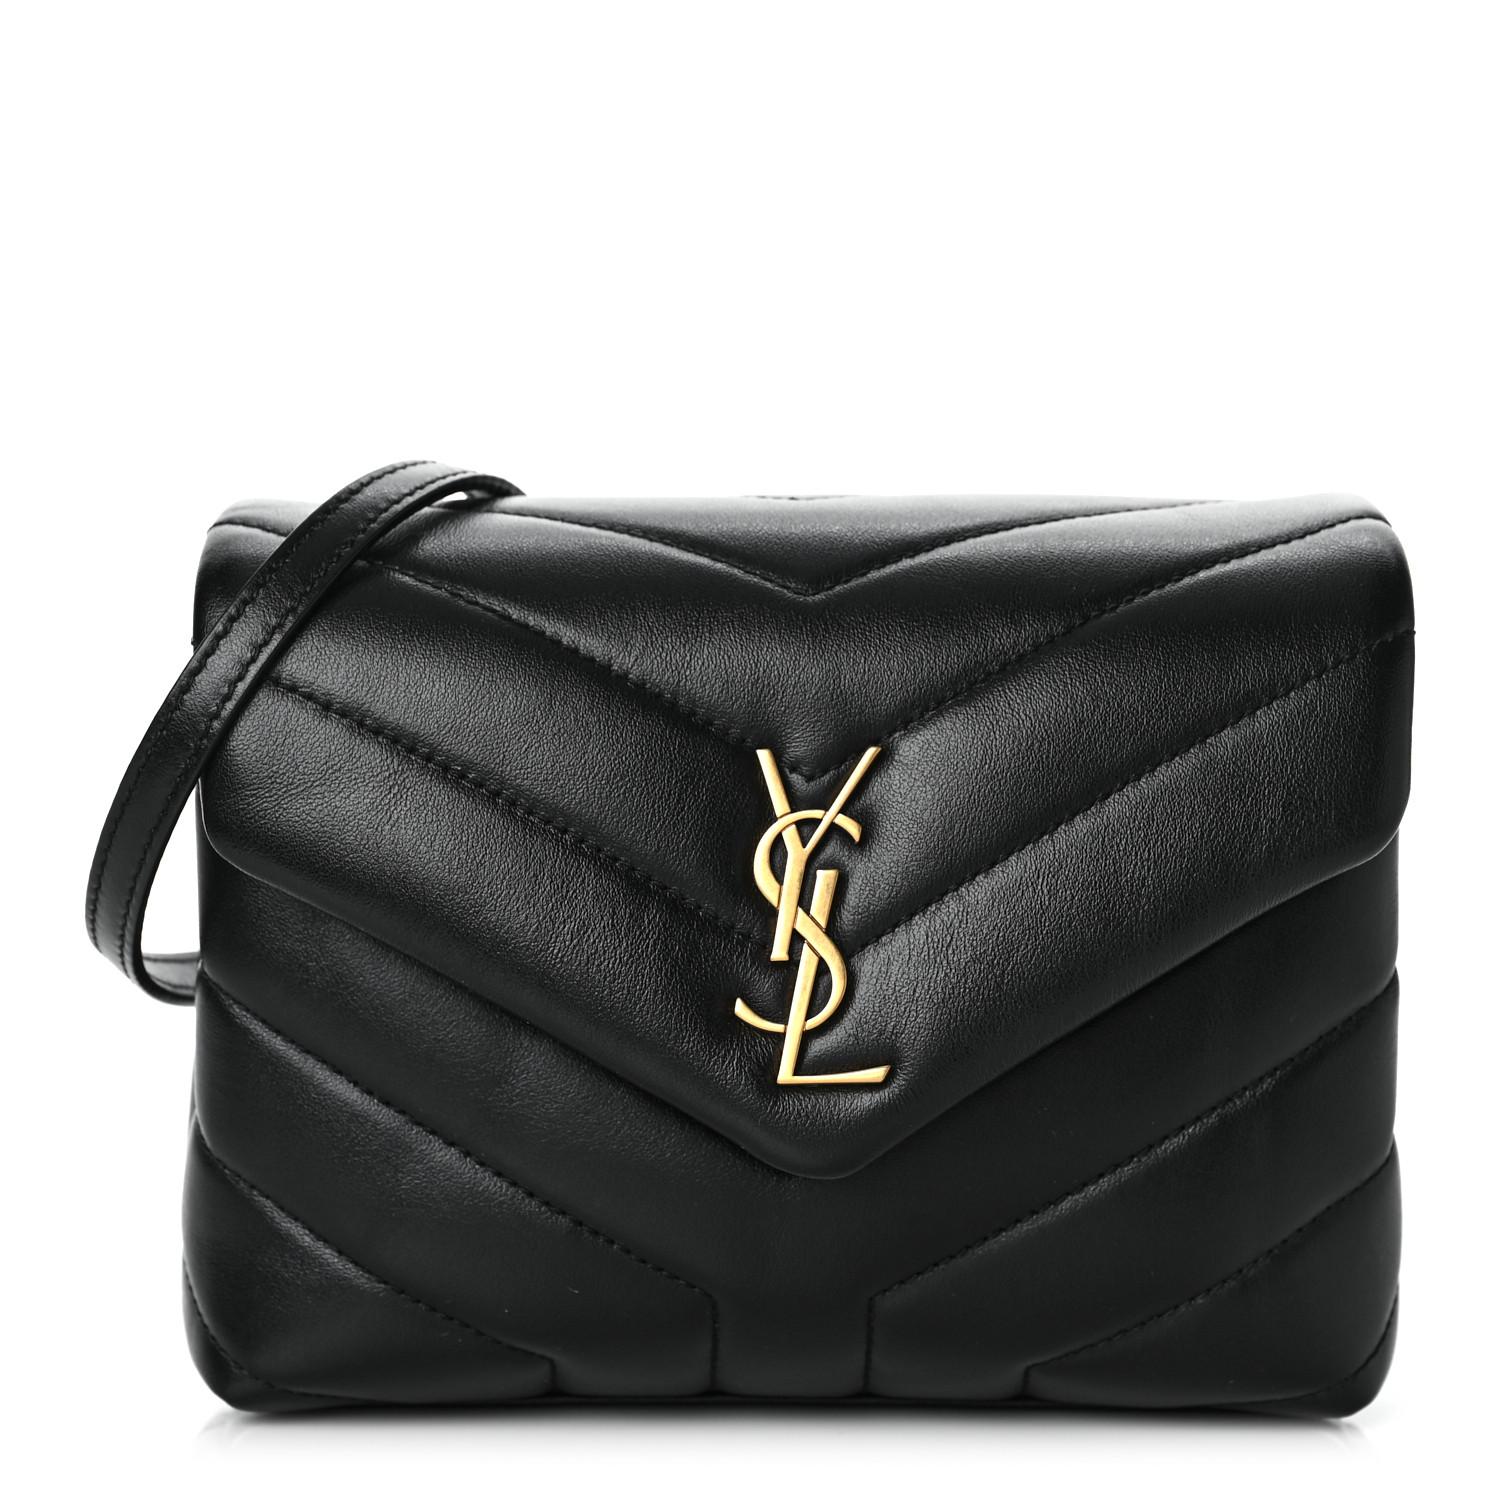 SAINT LAURENT Classic Toy LOU LOU bag with Gold hardware black 2020 In Excellent Condition For Sale In Montreal, Quebec